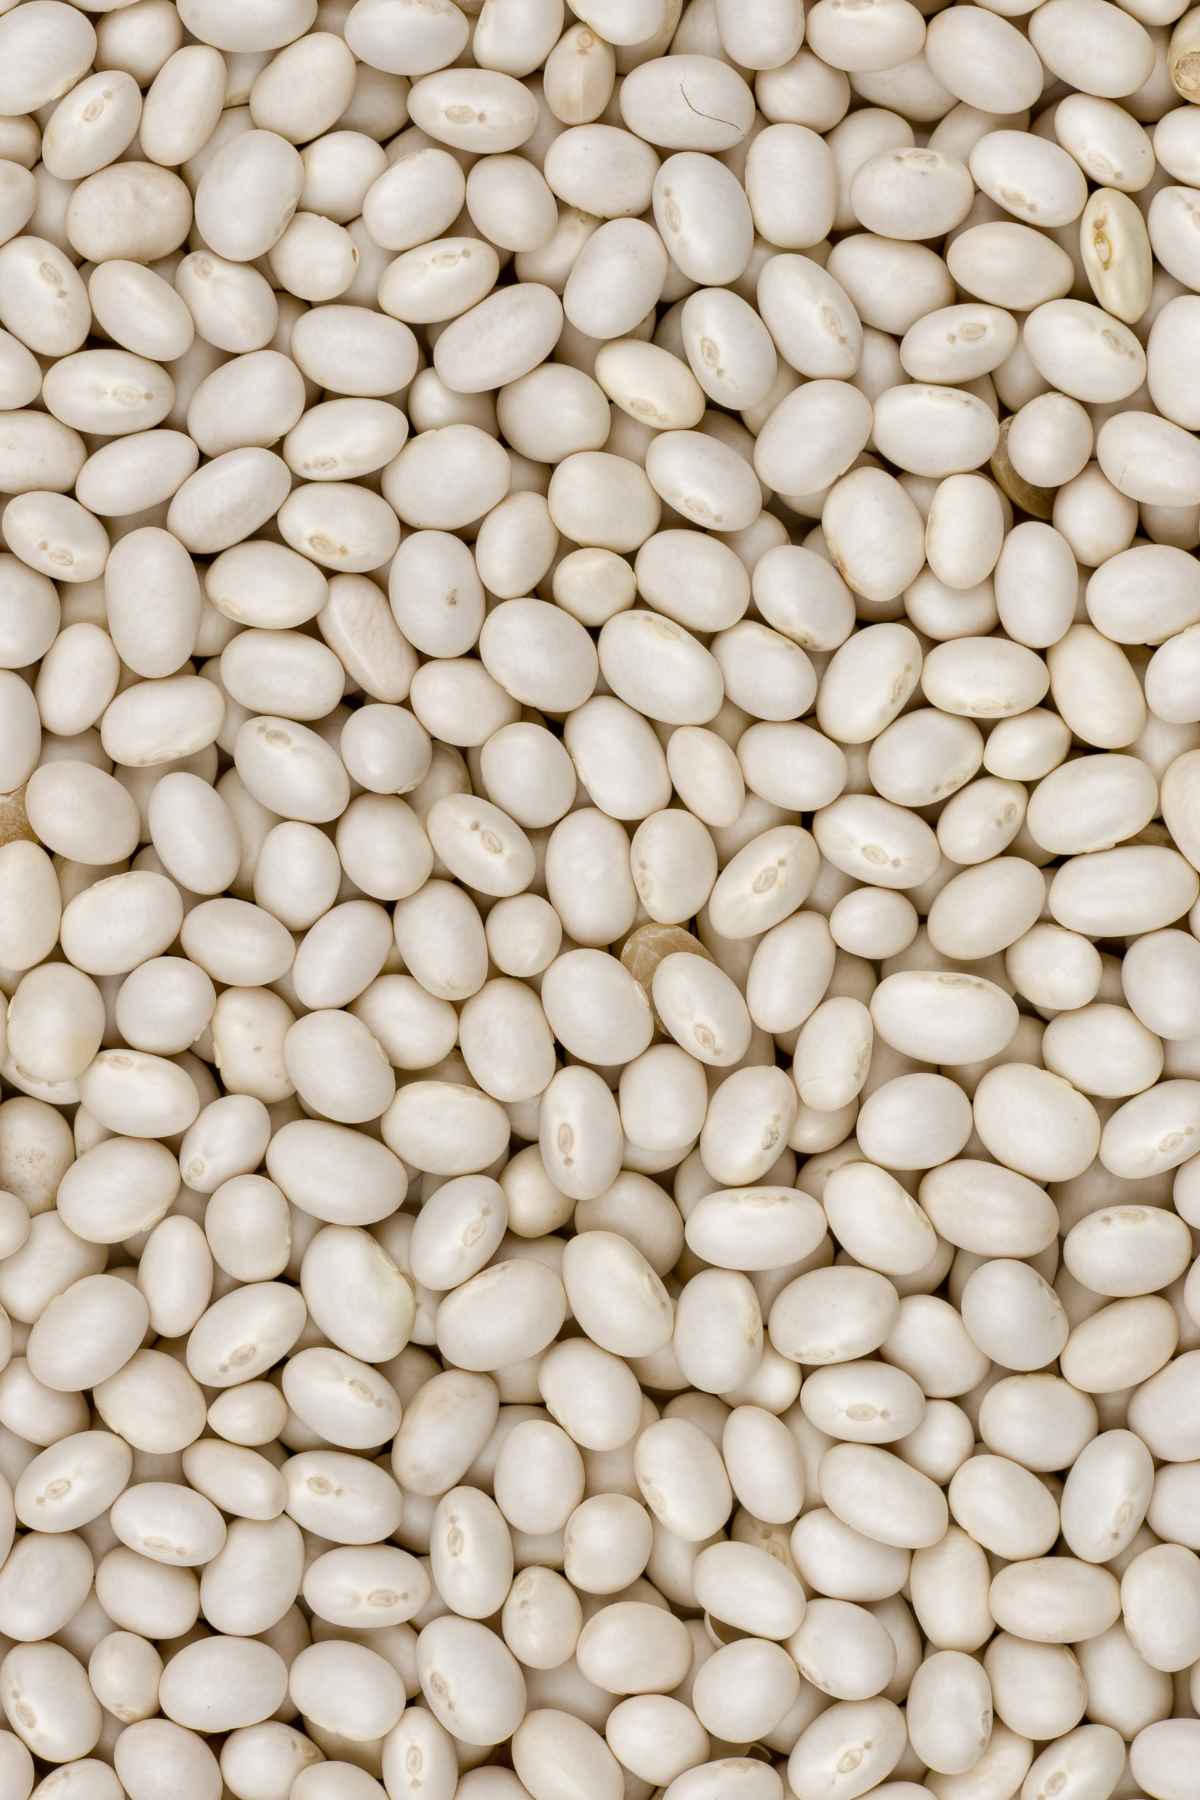 legumes with highest protein